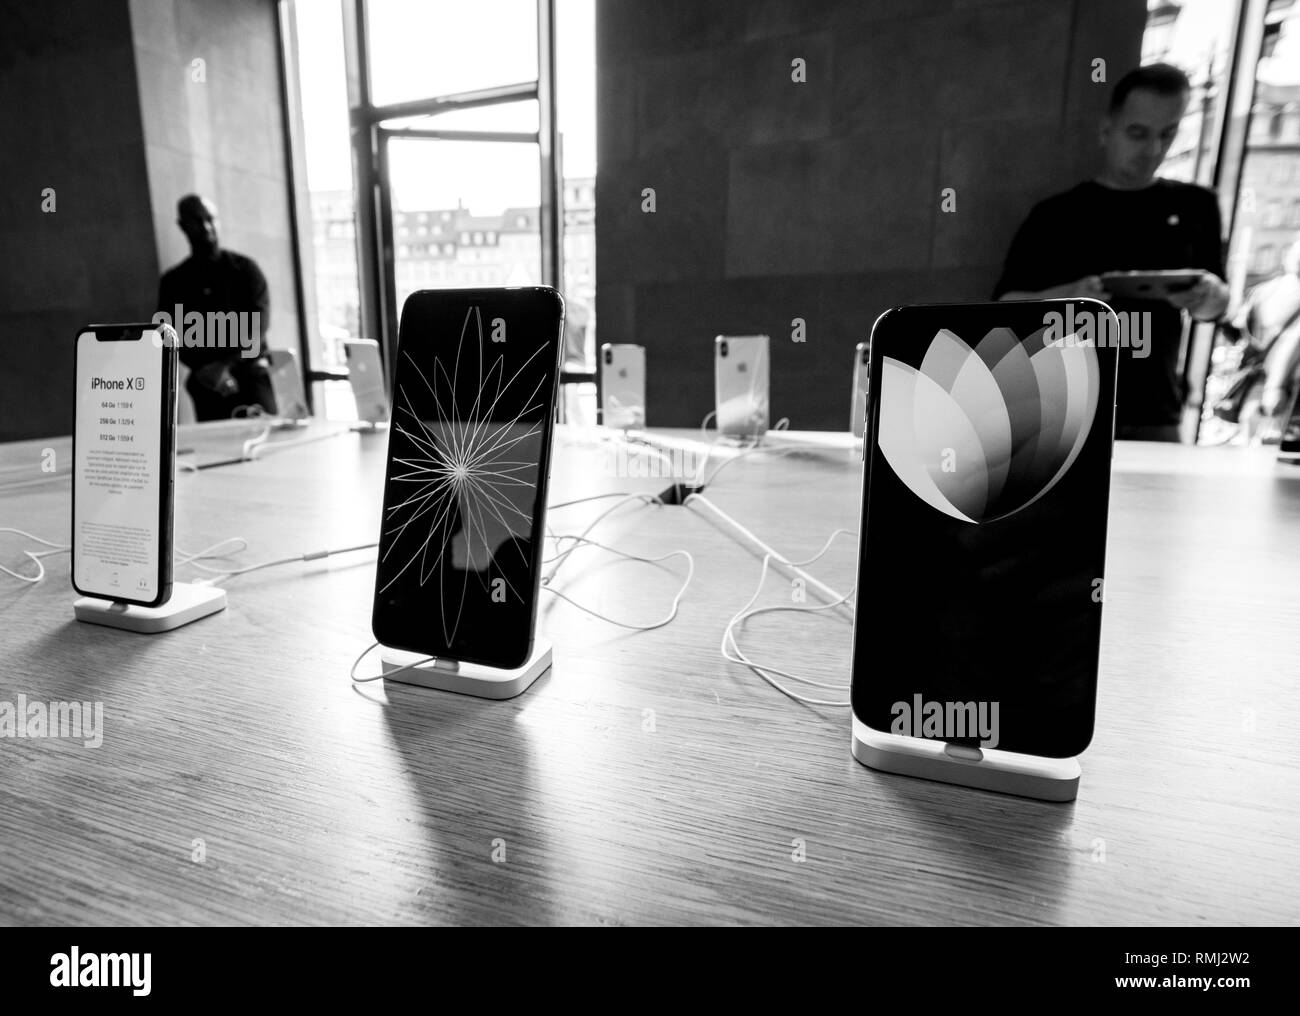 STRASBOURG, FRANCE - SEP 21, 2018: Row of new iPhones in Apple Store with customers people buying admiring the new latest iPhone Xs and Xs Max preorder for Xr and Watch Series 4 wearable - black and white Stock Photo